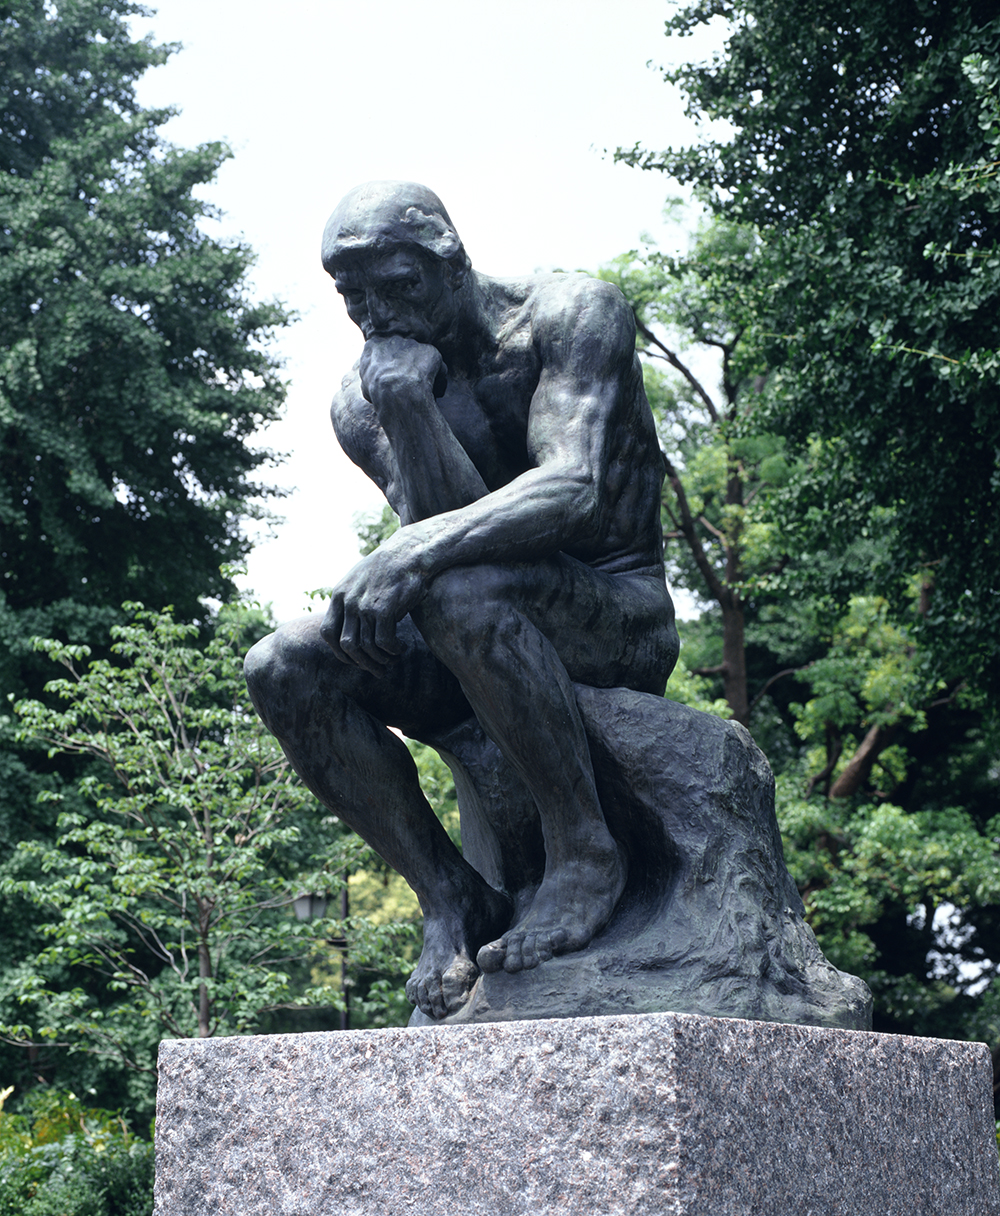 photo:Auguste Rodin
The Thinker (Enlarged)